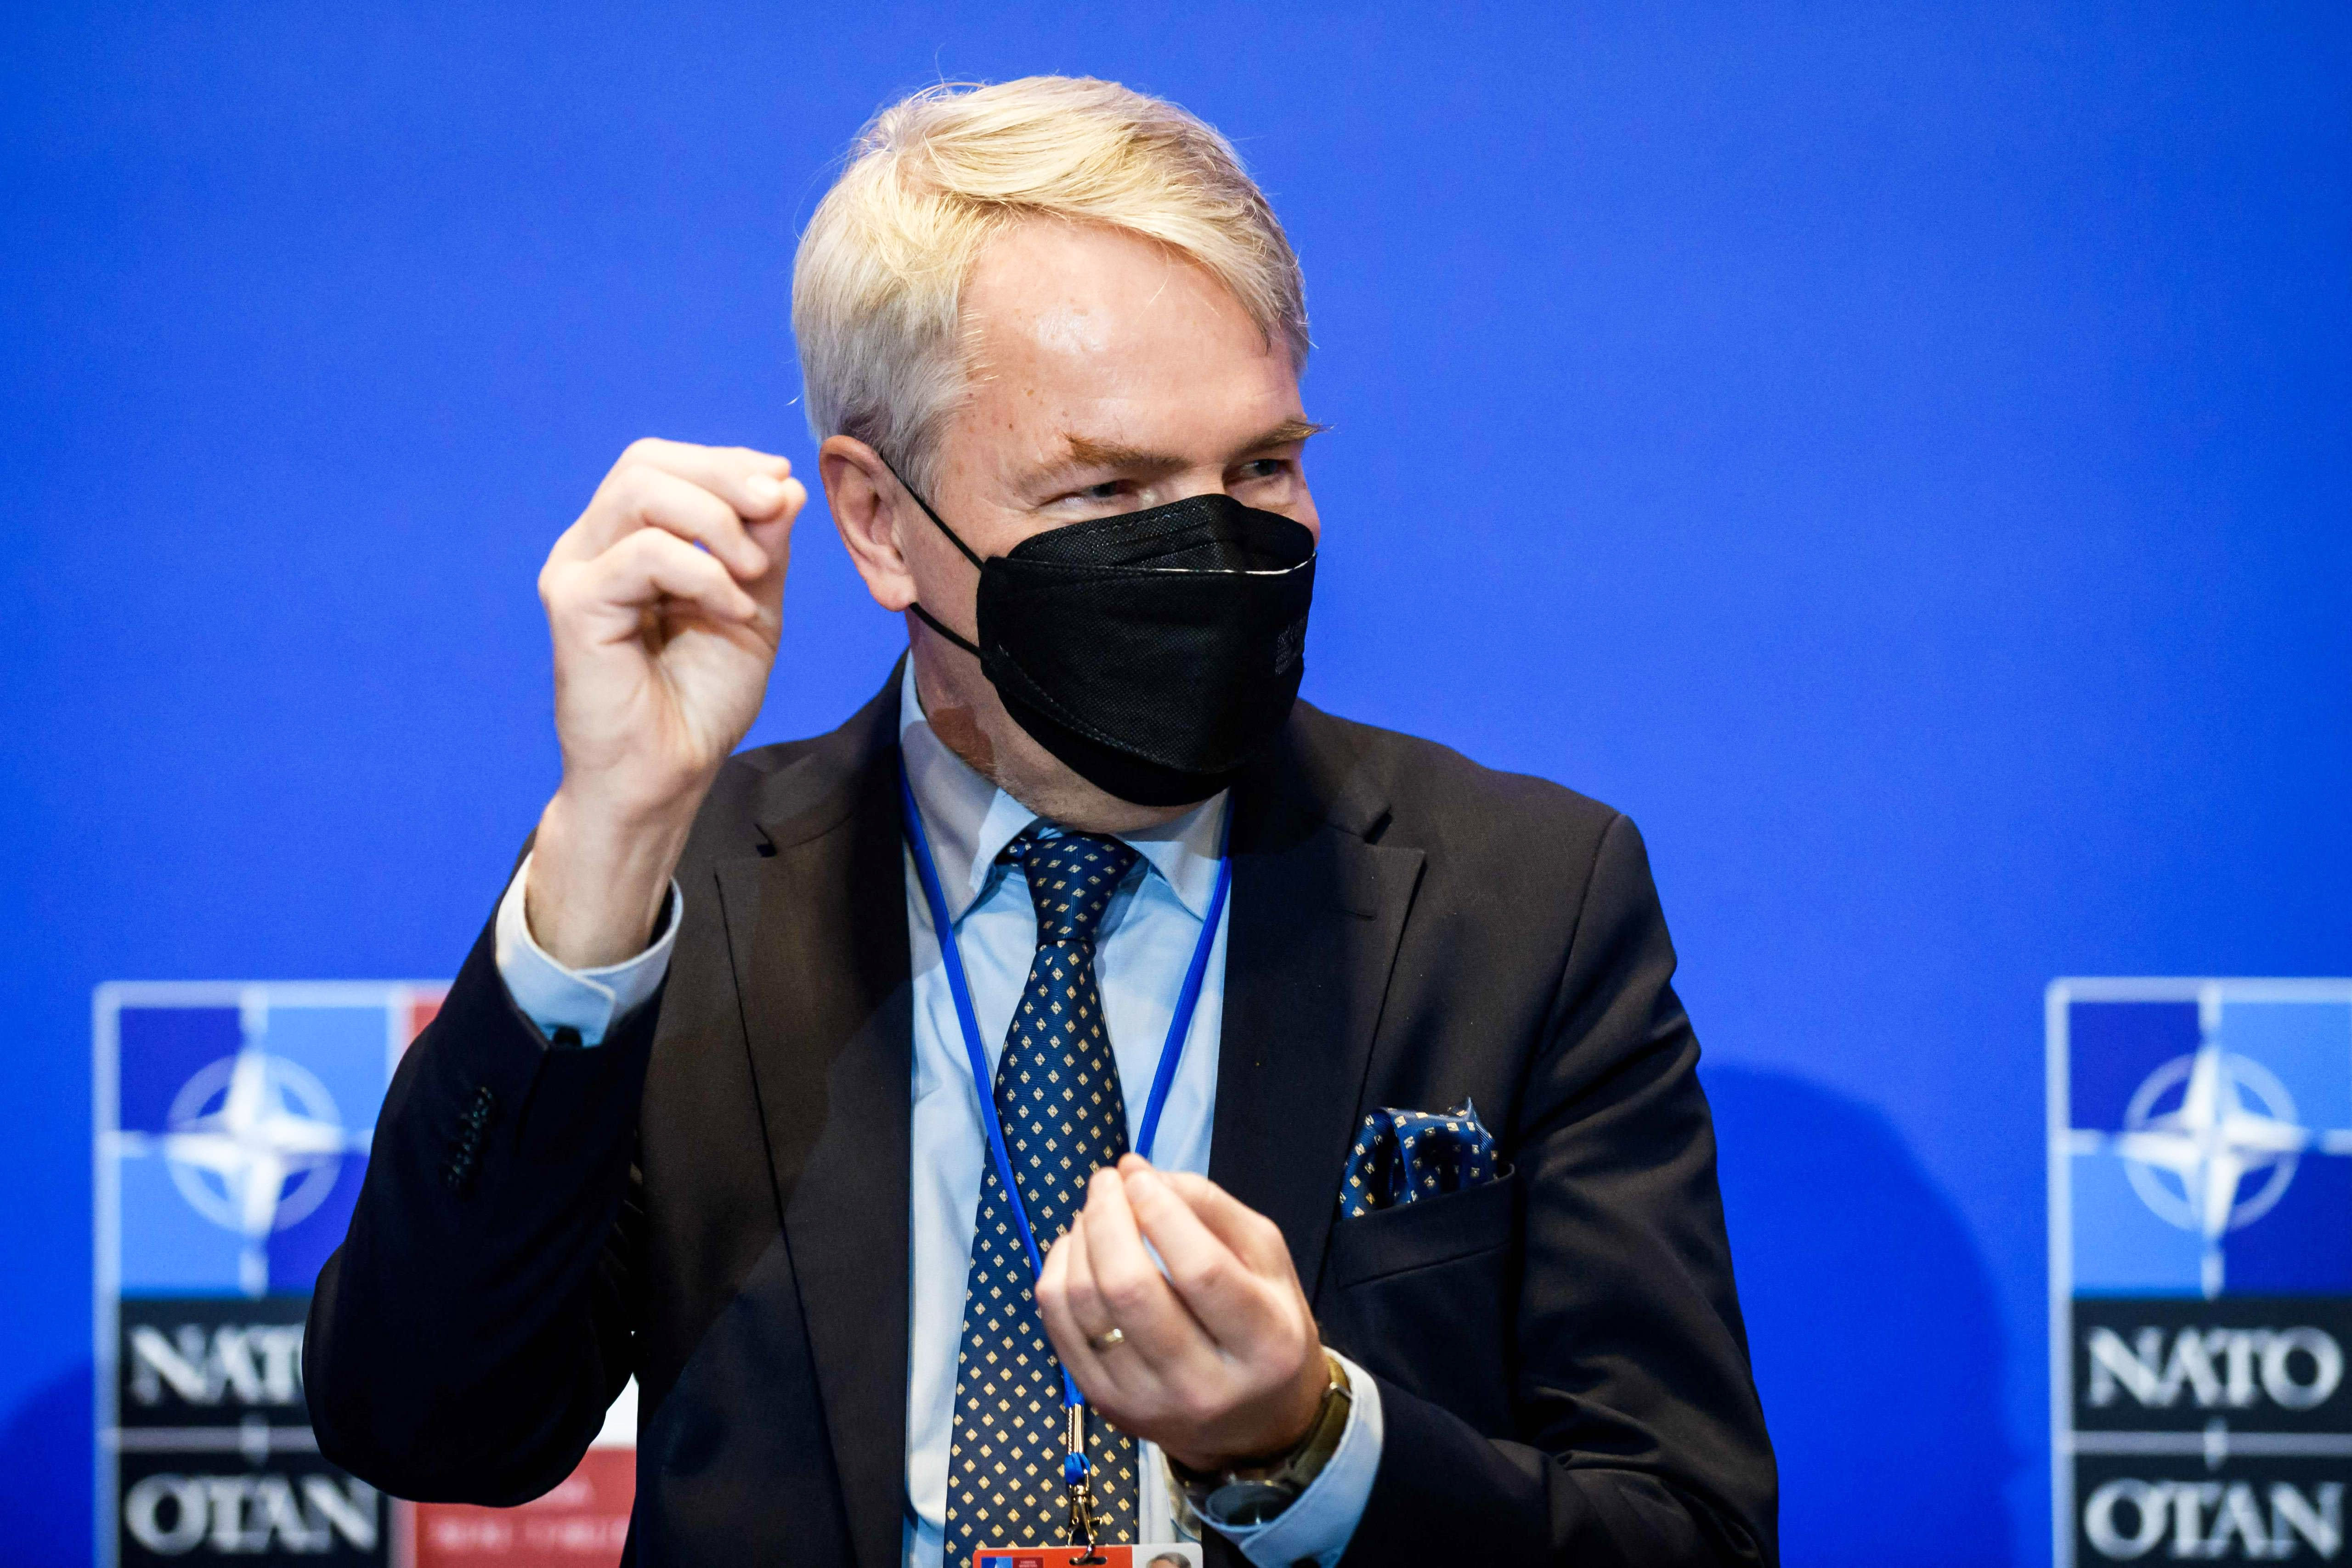 The Finnish Foreign Minister’s Covid test is positive